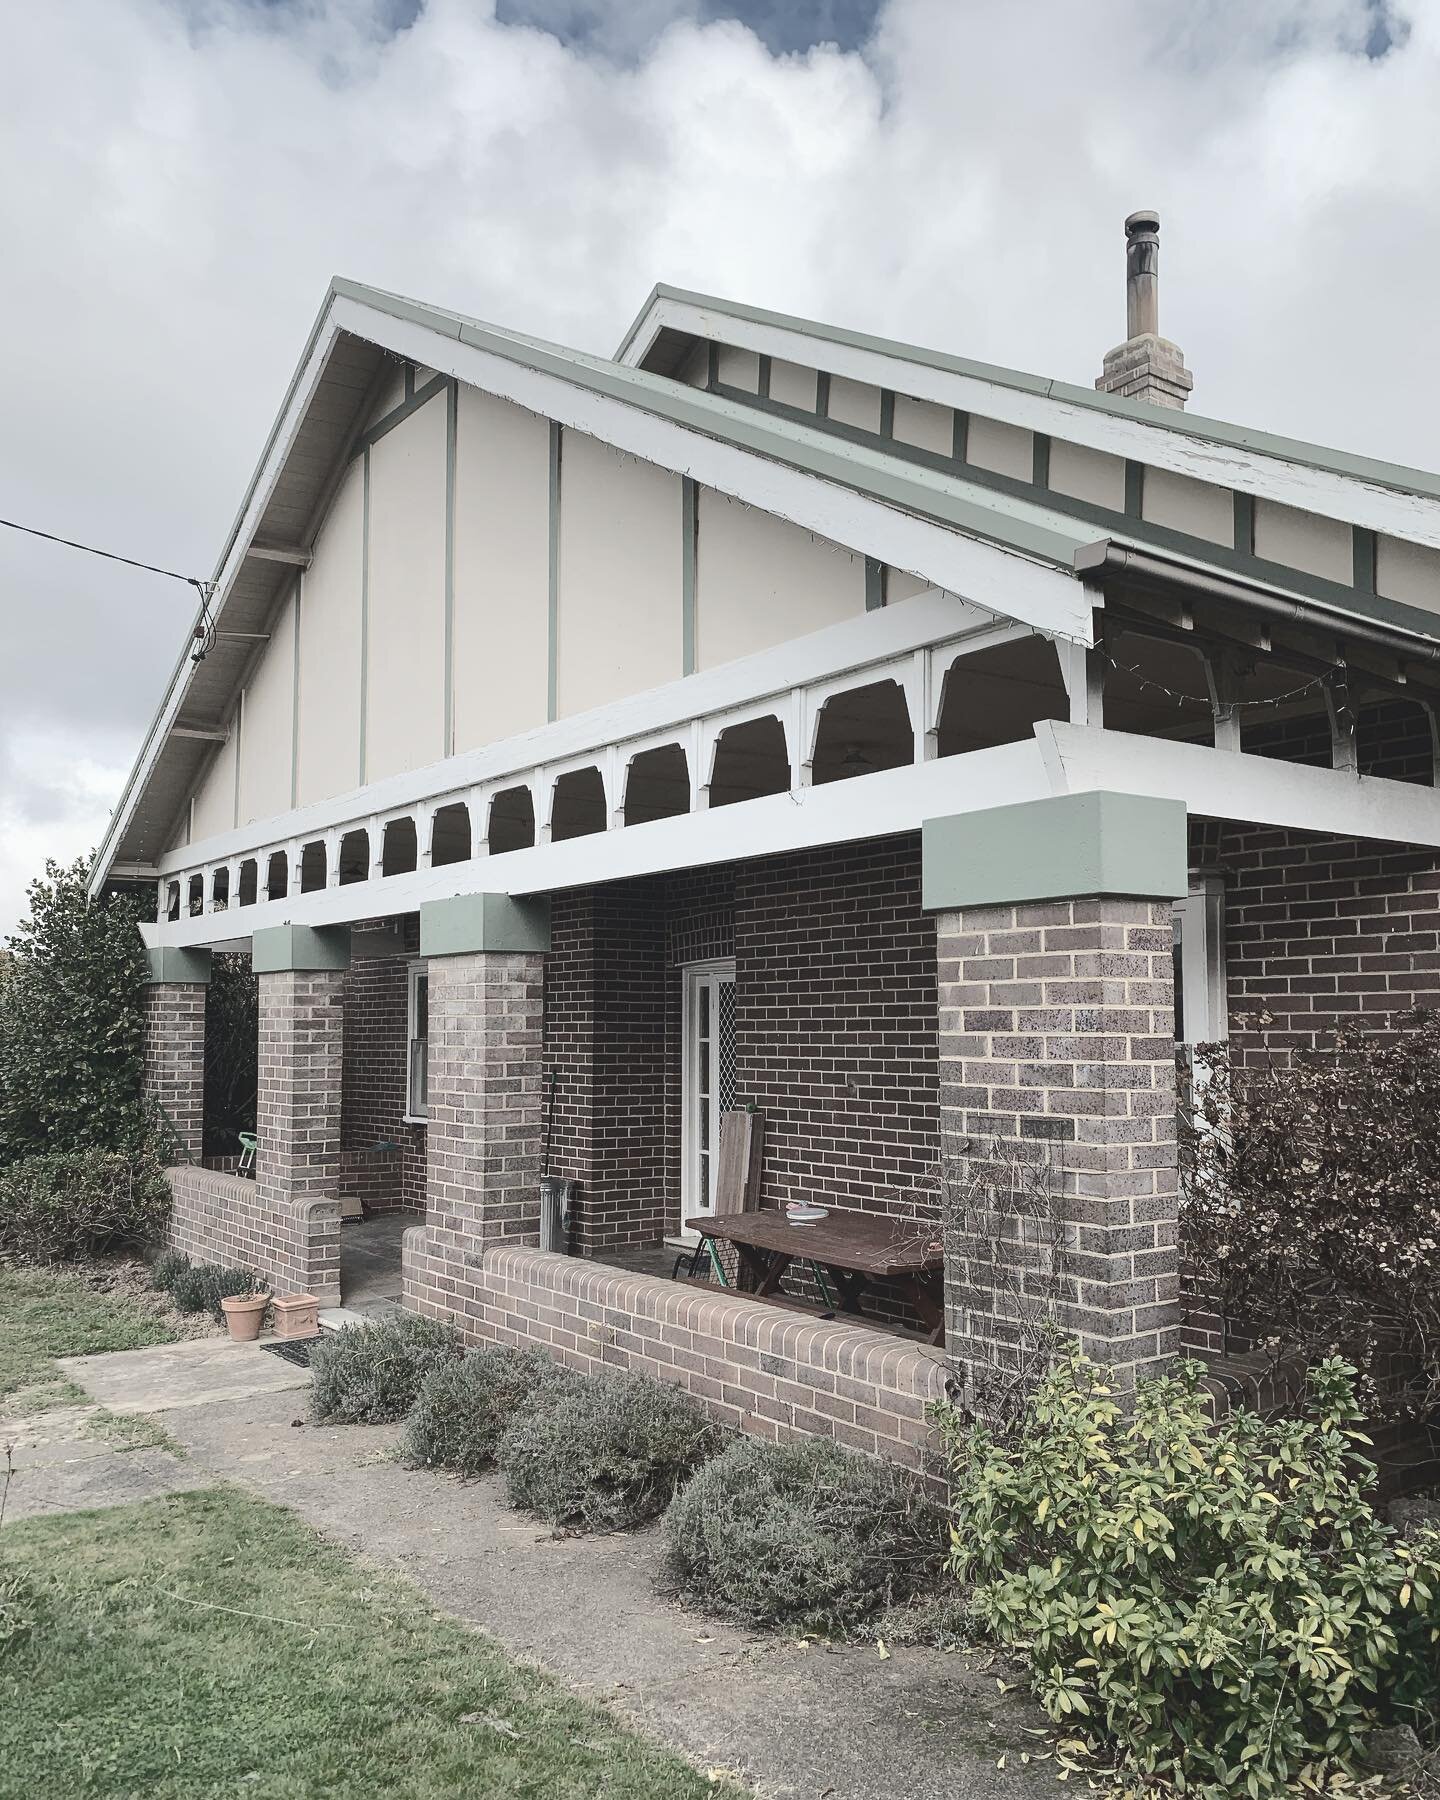 NEW PROJECT  Concepts have started on this little Gem!
.
.
.
.
.
.
#kensitarchitects #architecture #architecturelovers #architect #nsw #homedesign #renovation #bungalowrenovation #australianarchitecture #nswarchitecture #extension #residentialdesign